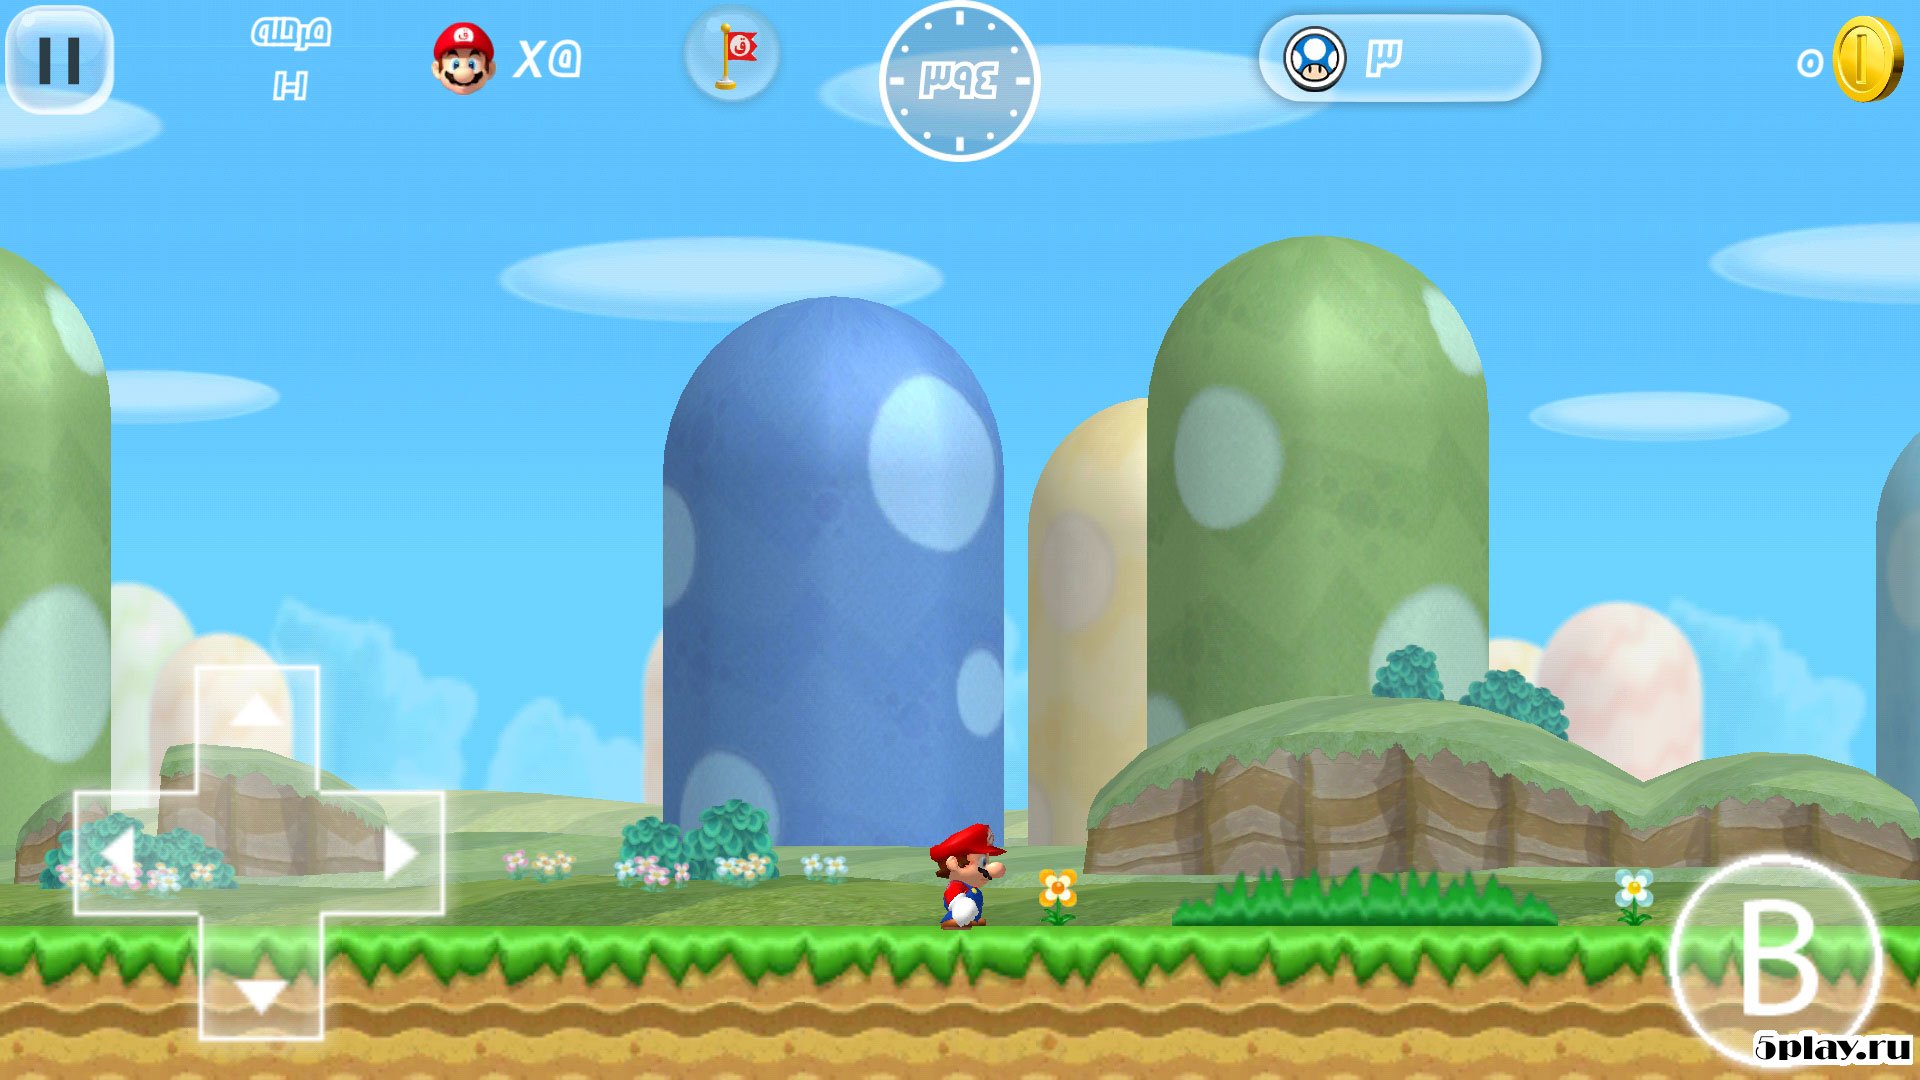 Download Super Mario 2 Hd 10 Apk Mod Money For Android